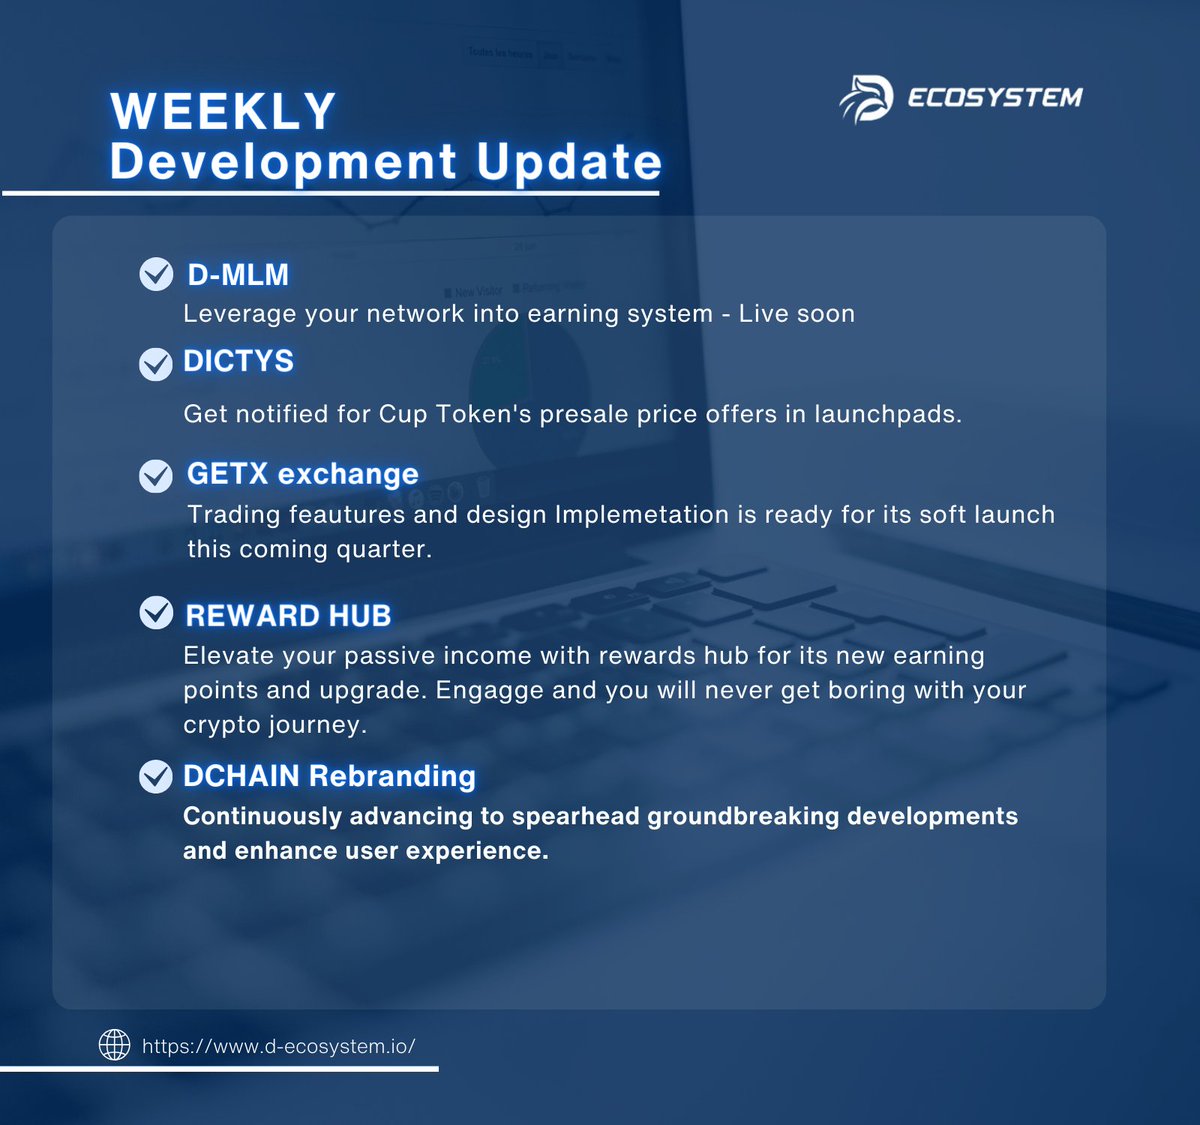 📢Here’s our weekly update! Our team has been hard at work, making improvements and implementing new features. 

Follow us on 
Tiktok: tiktok.com/@d_ecosystem
Telegram:  t.me/d_ecosystem_gr…
Discord: discord.gg/XMQtzZNV

#WeeklyReport #Cryptocurency #RWA